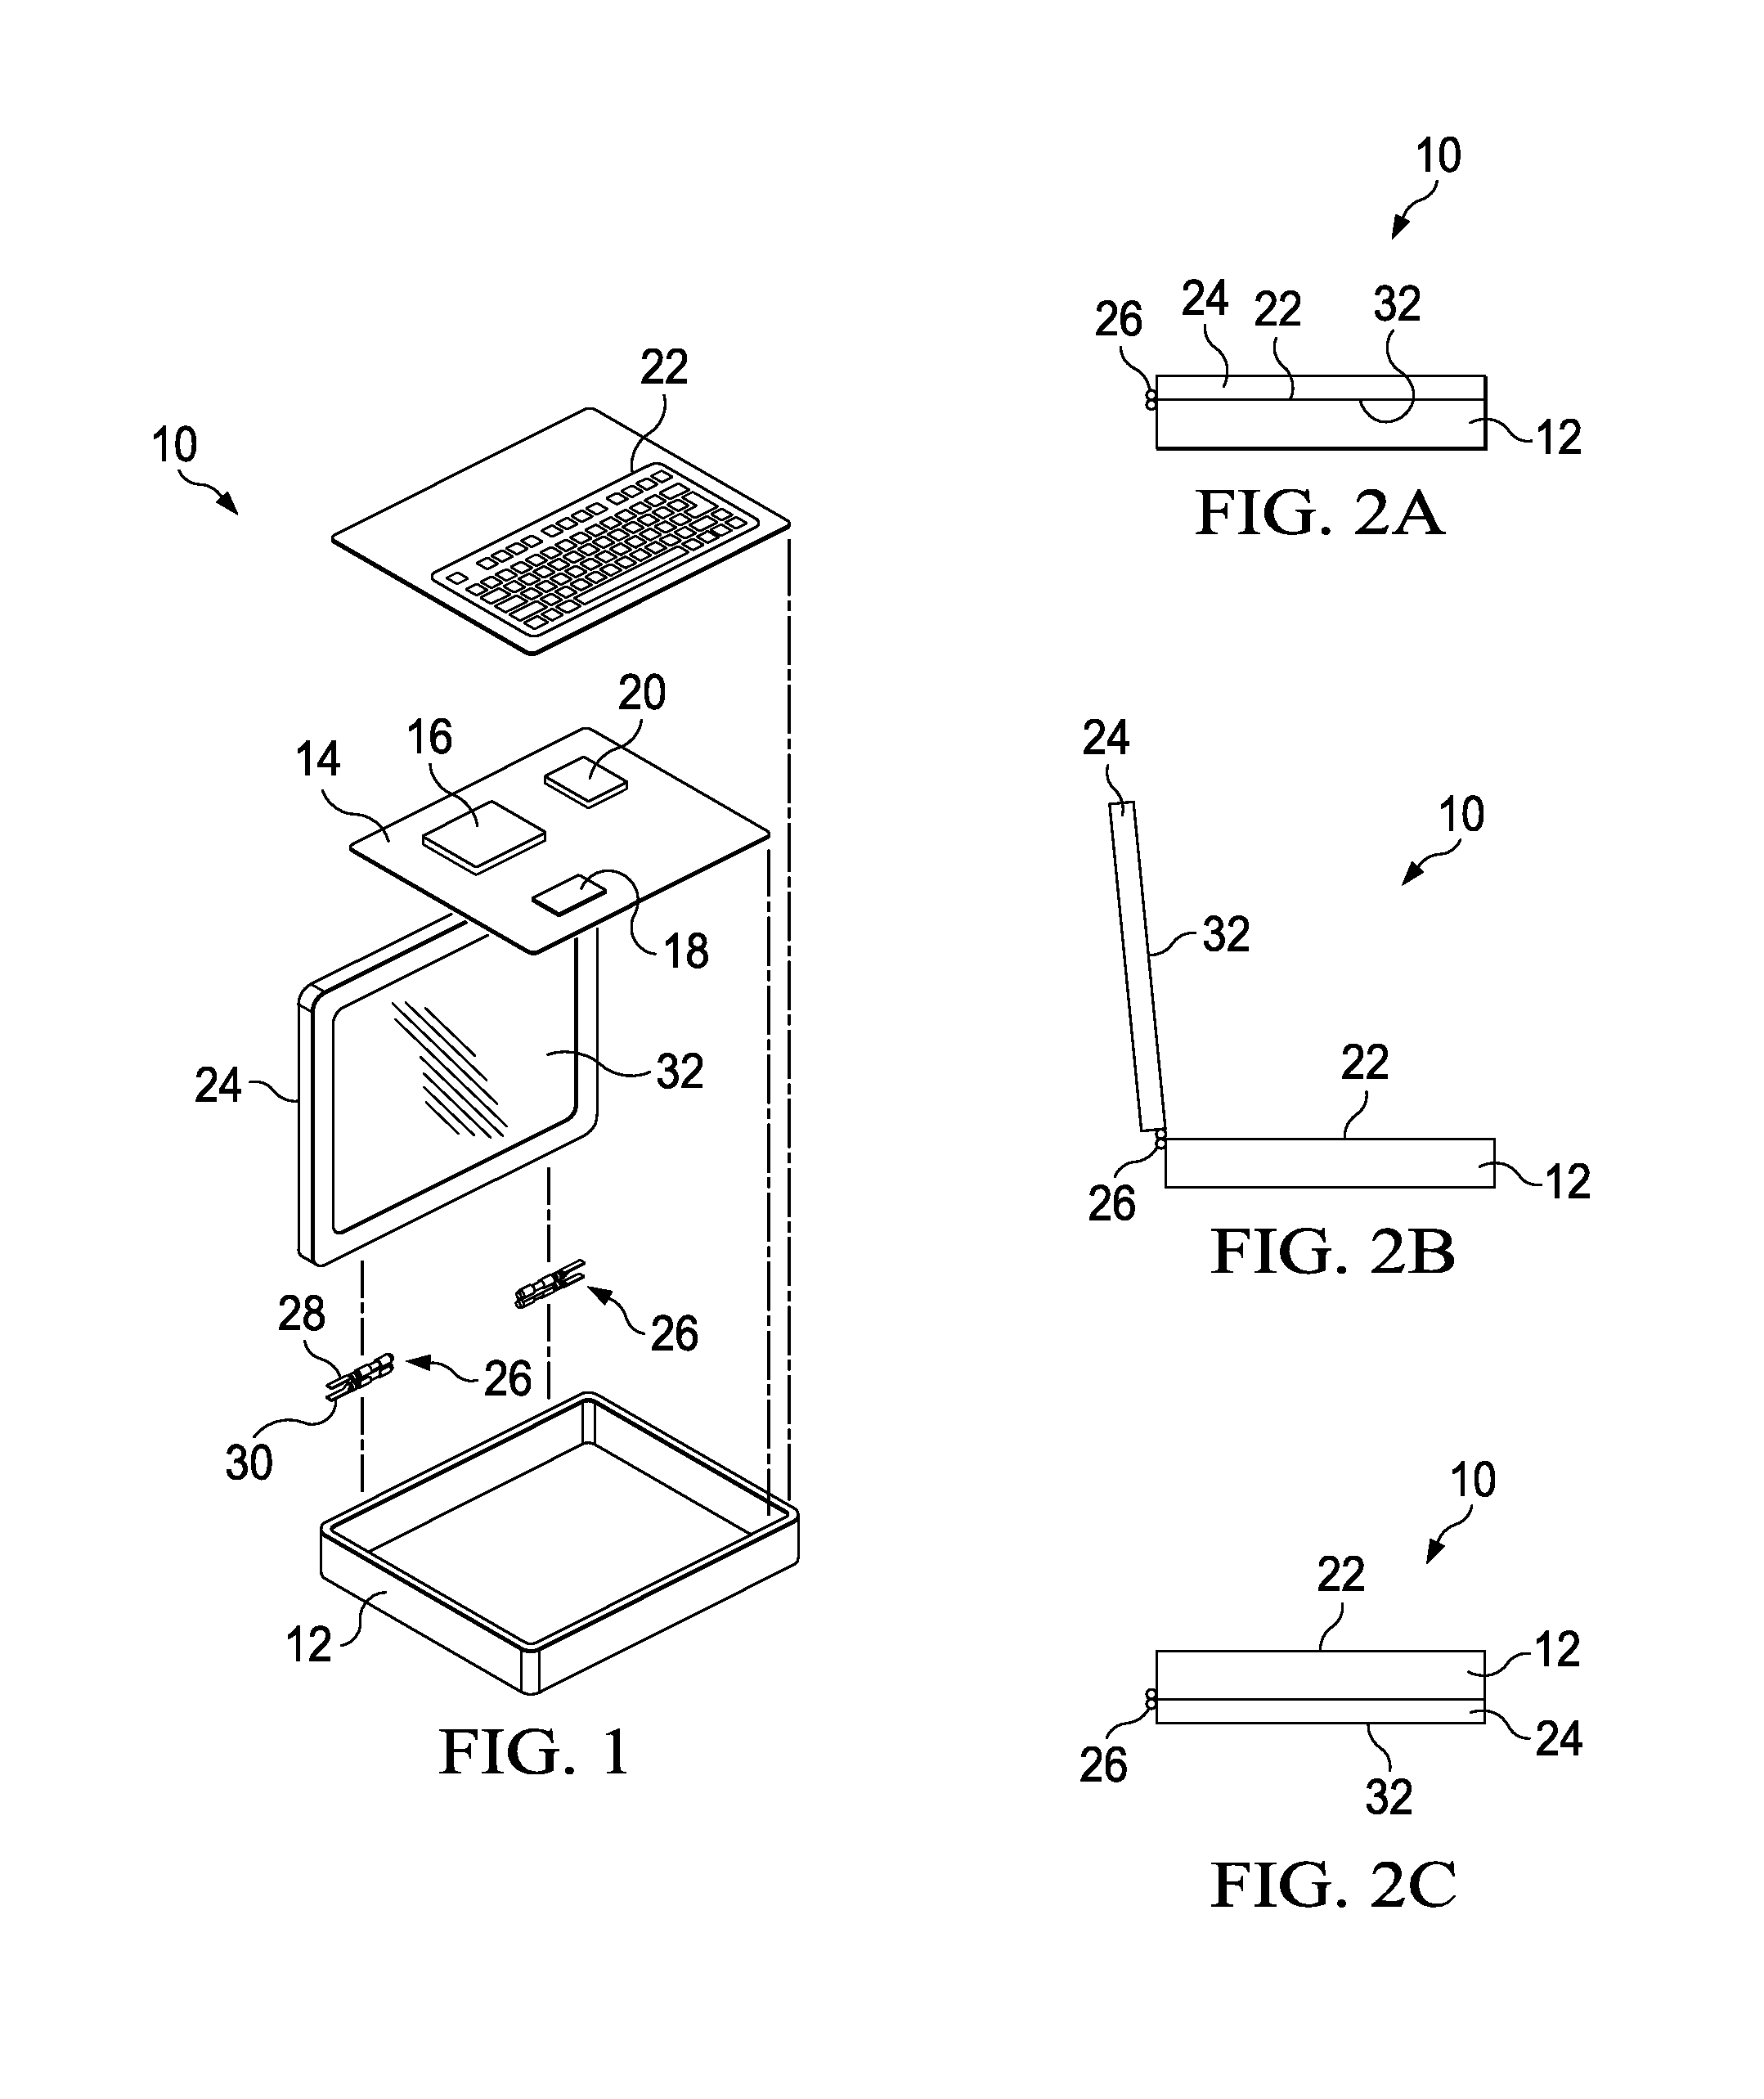 Information handling system housing lid with synchronized motion